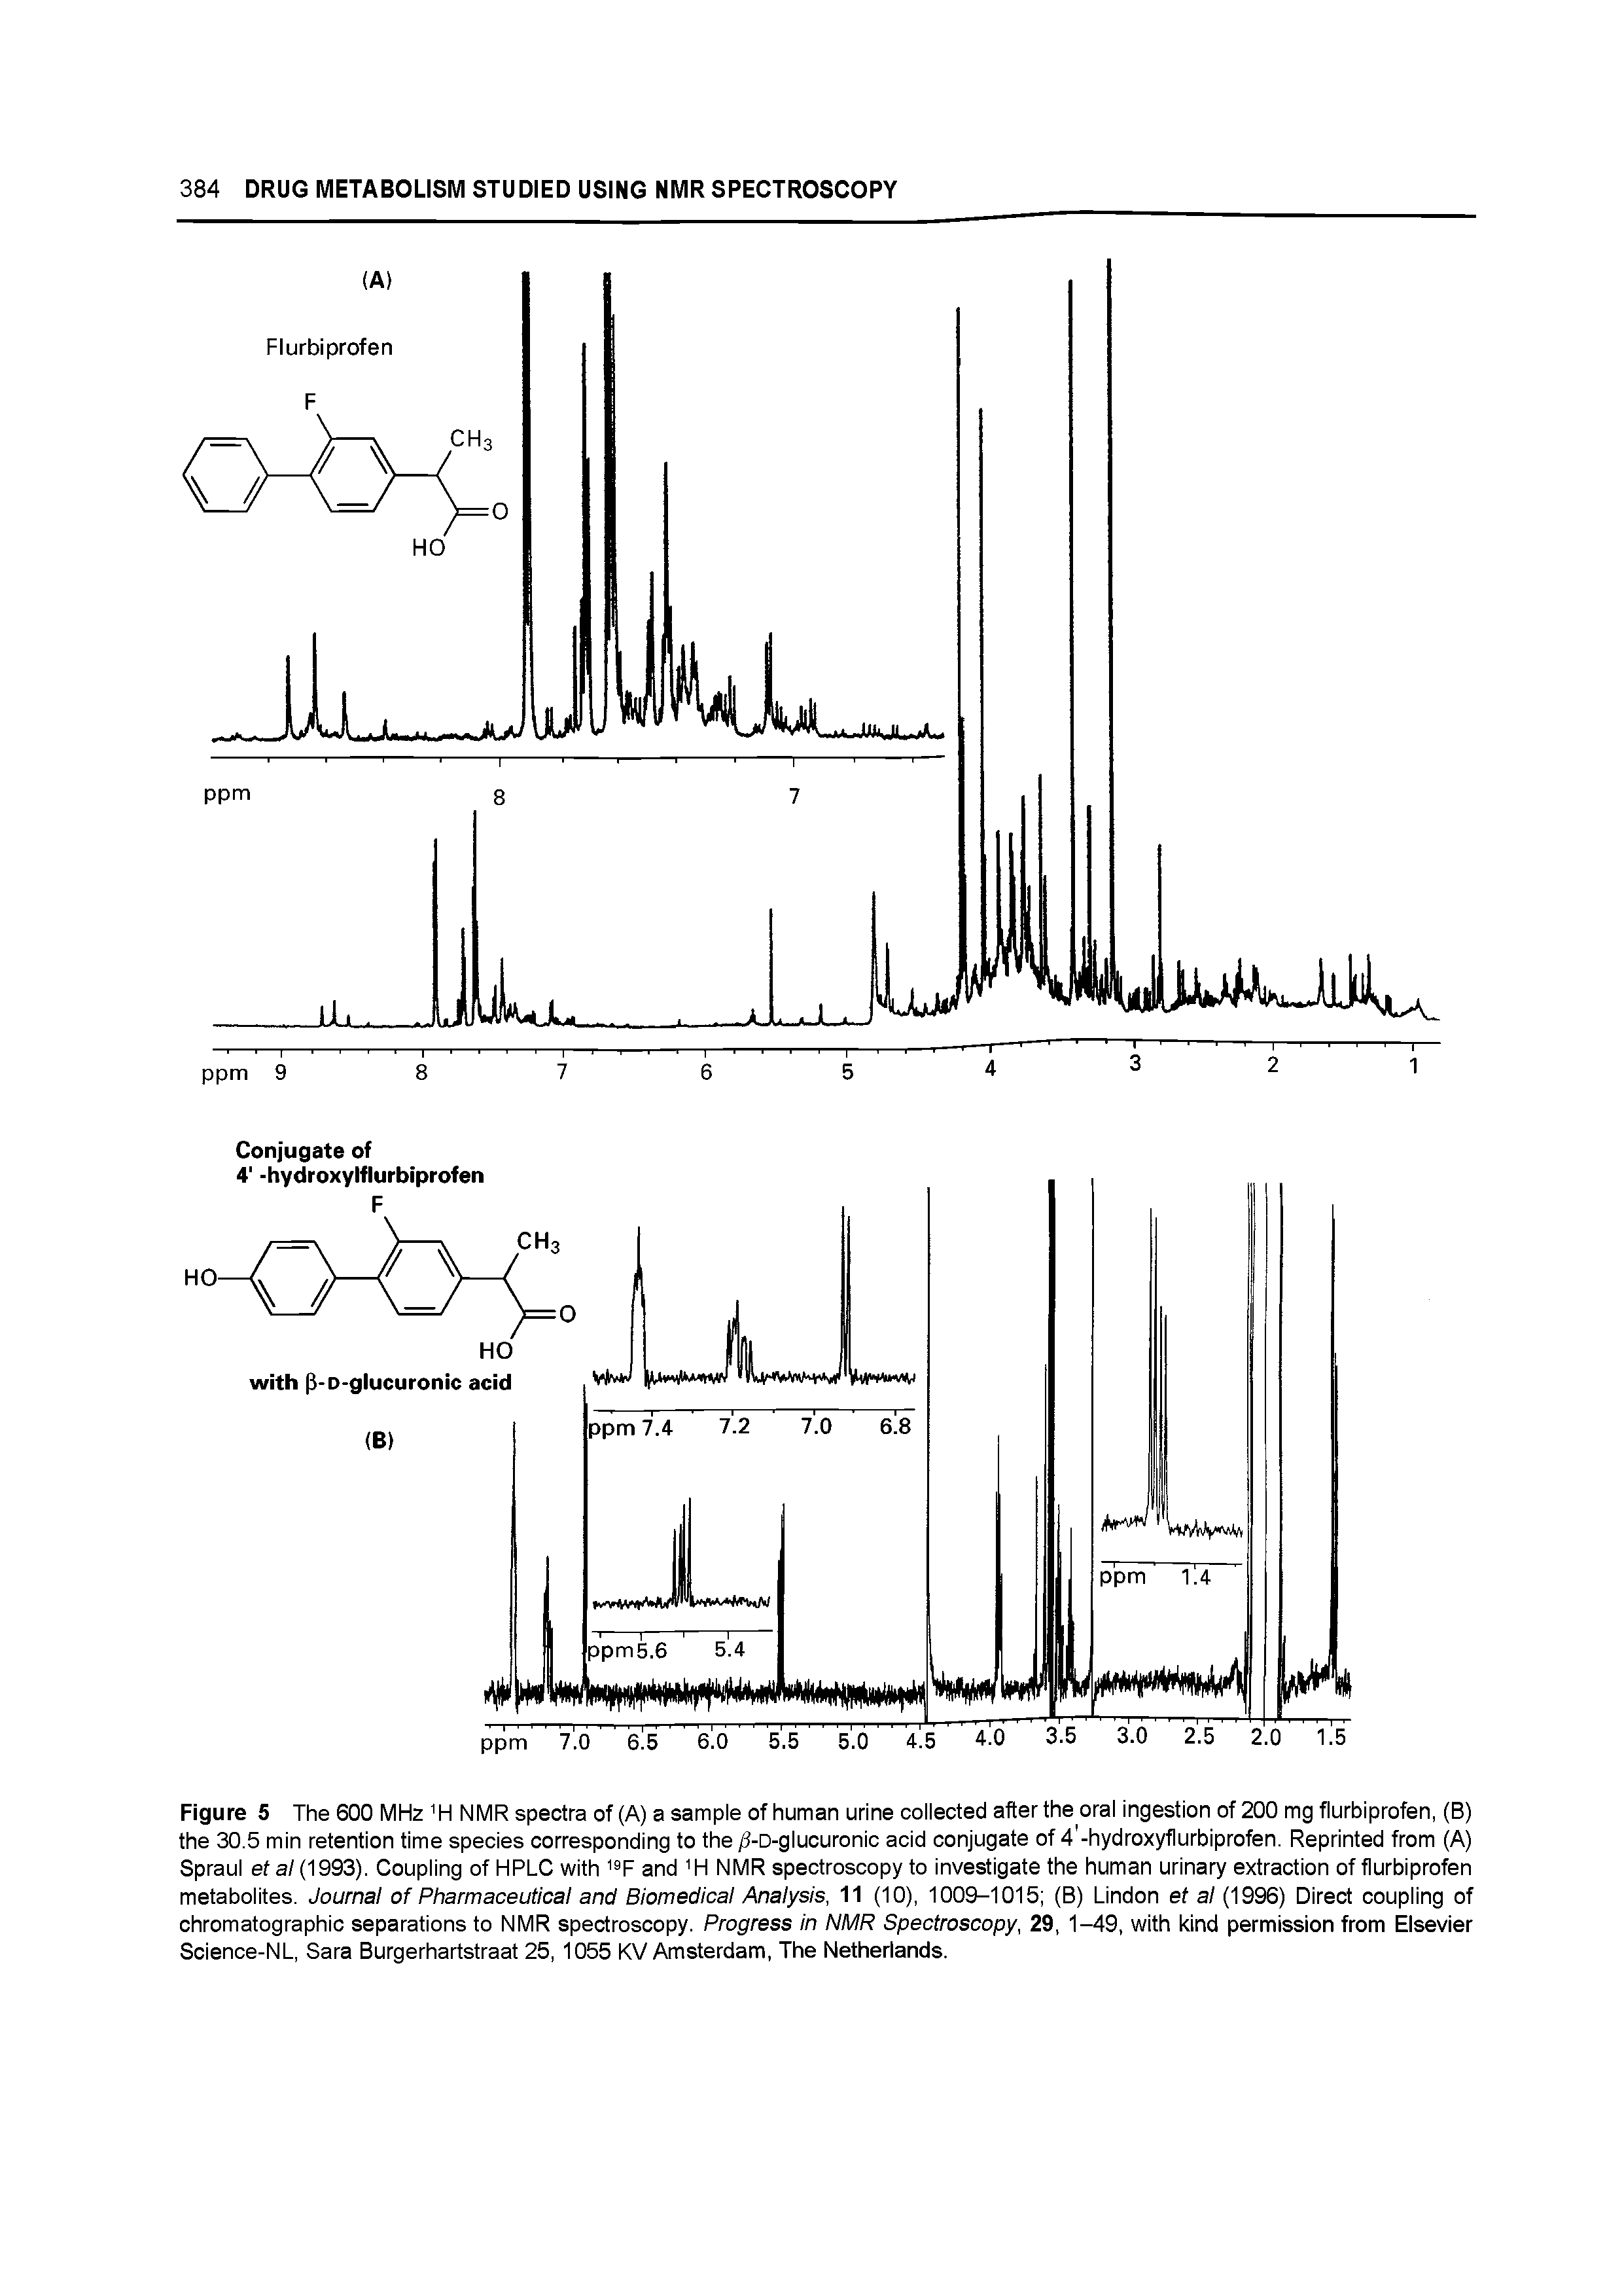 Figure 5 The 600 MHz H NMR spectra of (A) a sample of human urine collected after the oral ingestion of 200 mg flurbiprofen, (B) the 30.5 min retention time species corresponding to the /3-D-glucuronic acid conjugate of 4 -hydroxyflurbiprofen. Reprinted from (A) Spraul ef a/(1993). Coupling of HPLC with and H NMR spectroscopy to investigate the human urinary extraction of flurbiprofen metabolites. Journal of Pharmaceutical and Biomedical Analysis, 11 (10), 1009-1015 (B) Lindon et al (1996) Direct coupling of chromatographic separations to NMR spectroscopy. Progress In NMR Spectroscopy, 29, 1-49, with kind permission from Elsevier Science-NL, Sara Burgerhartstraat 25,1055 KV Amsterdam, The Netherlands.